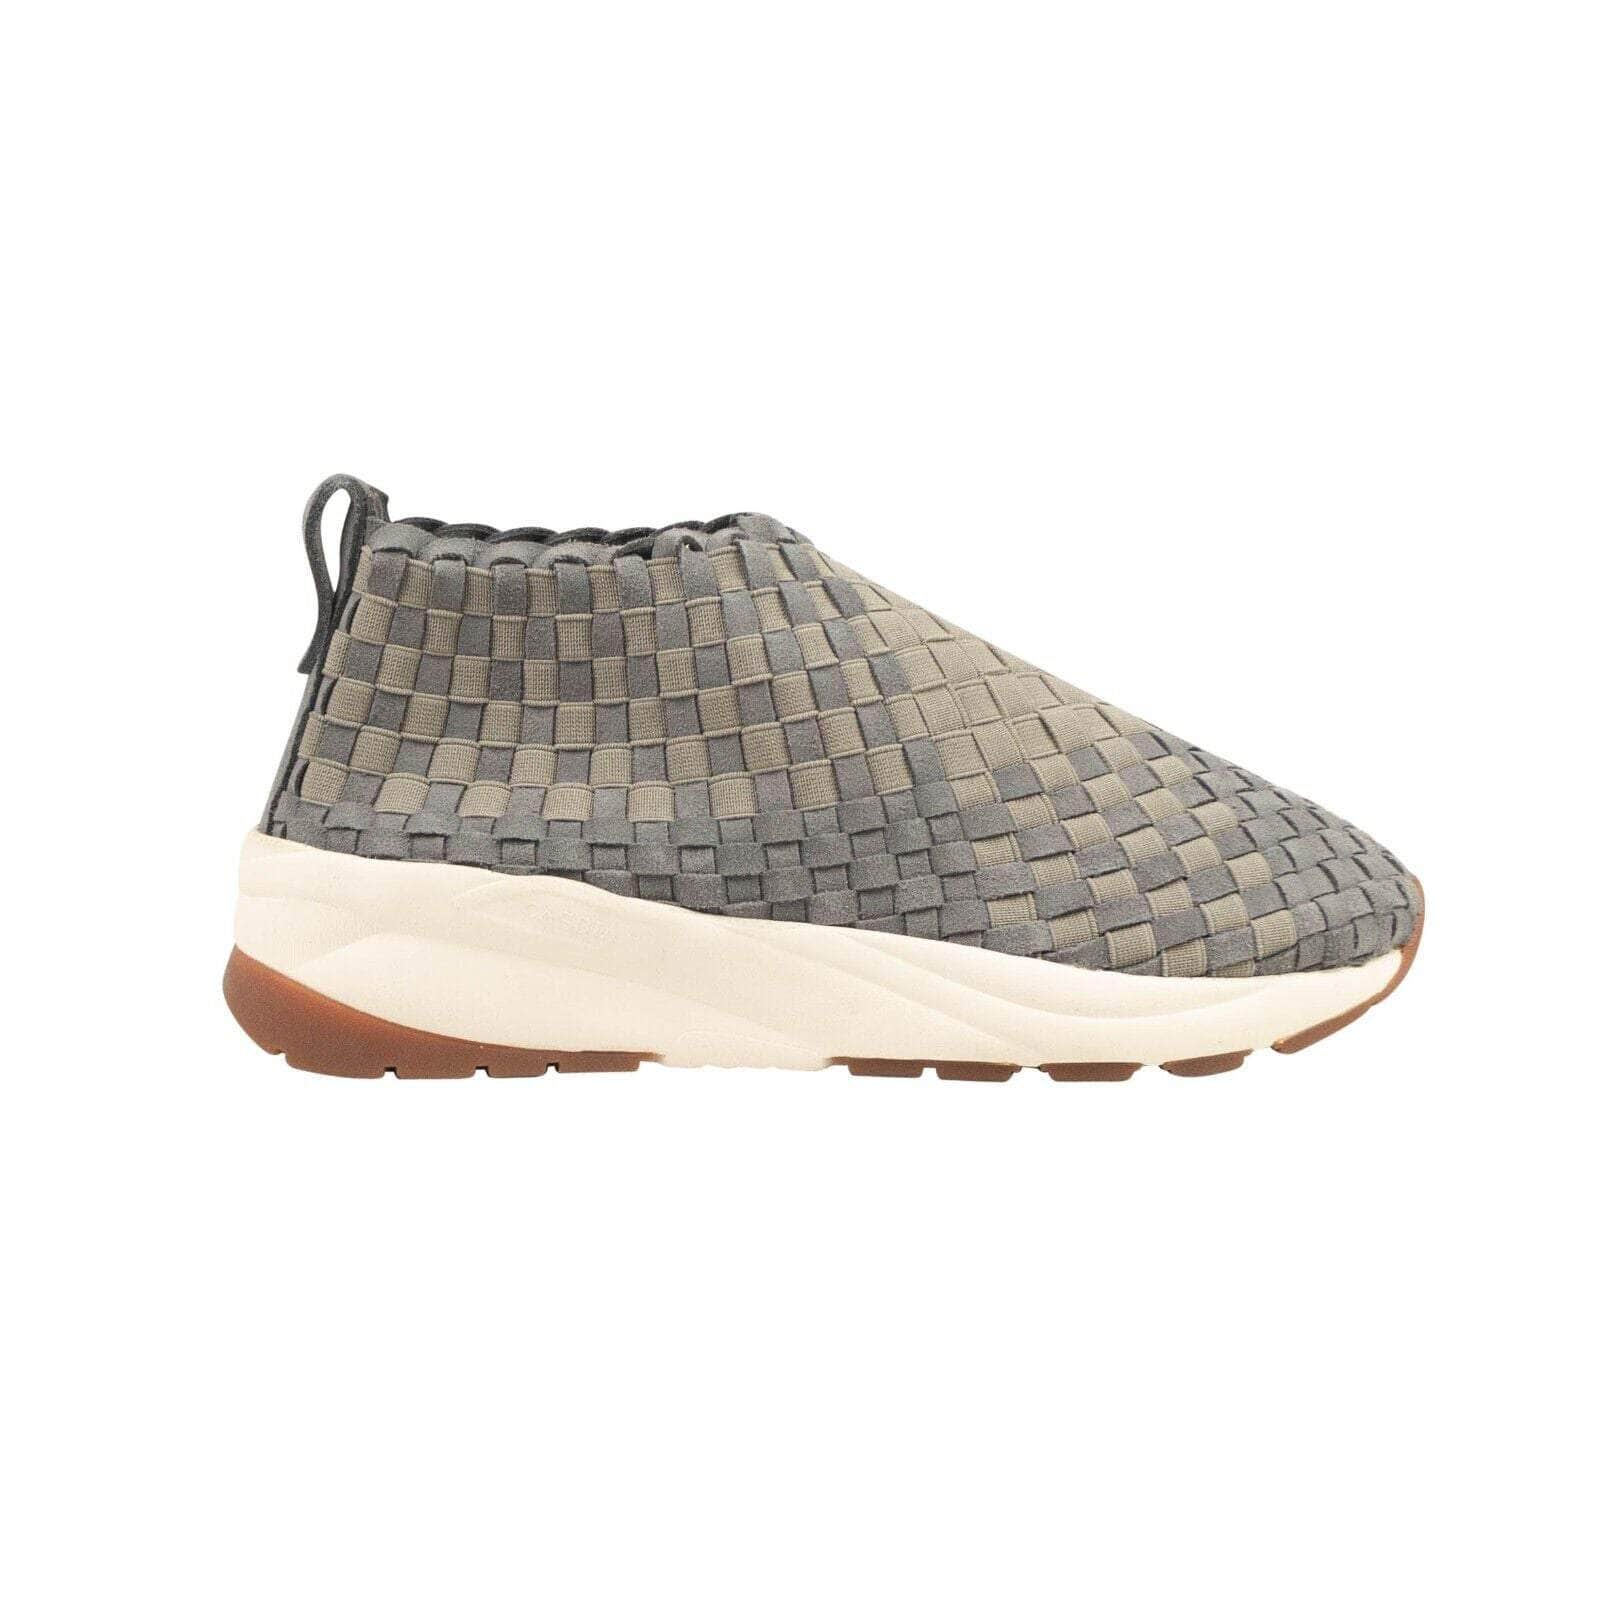 Casbia casbia, channelenable-all, chicmi, couponcollection, gender-mens, main-shoes, mens-shoes, MixedApparel, size-40, size-41, size-42, size-43, size-45, size-46, under-250 Grey Rev Woven Slip On Sneakers